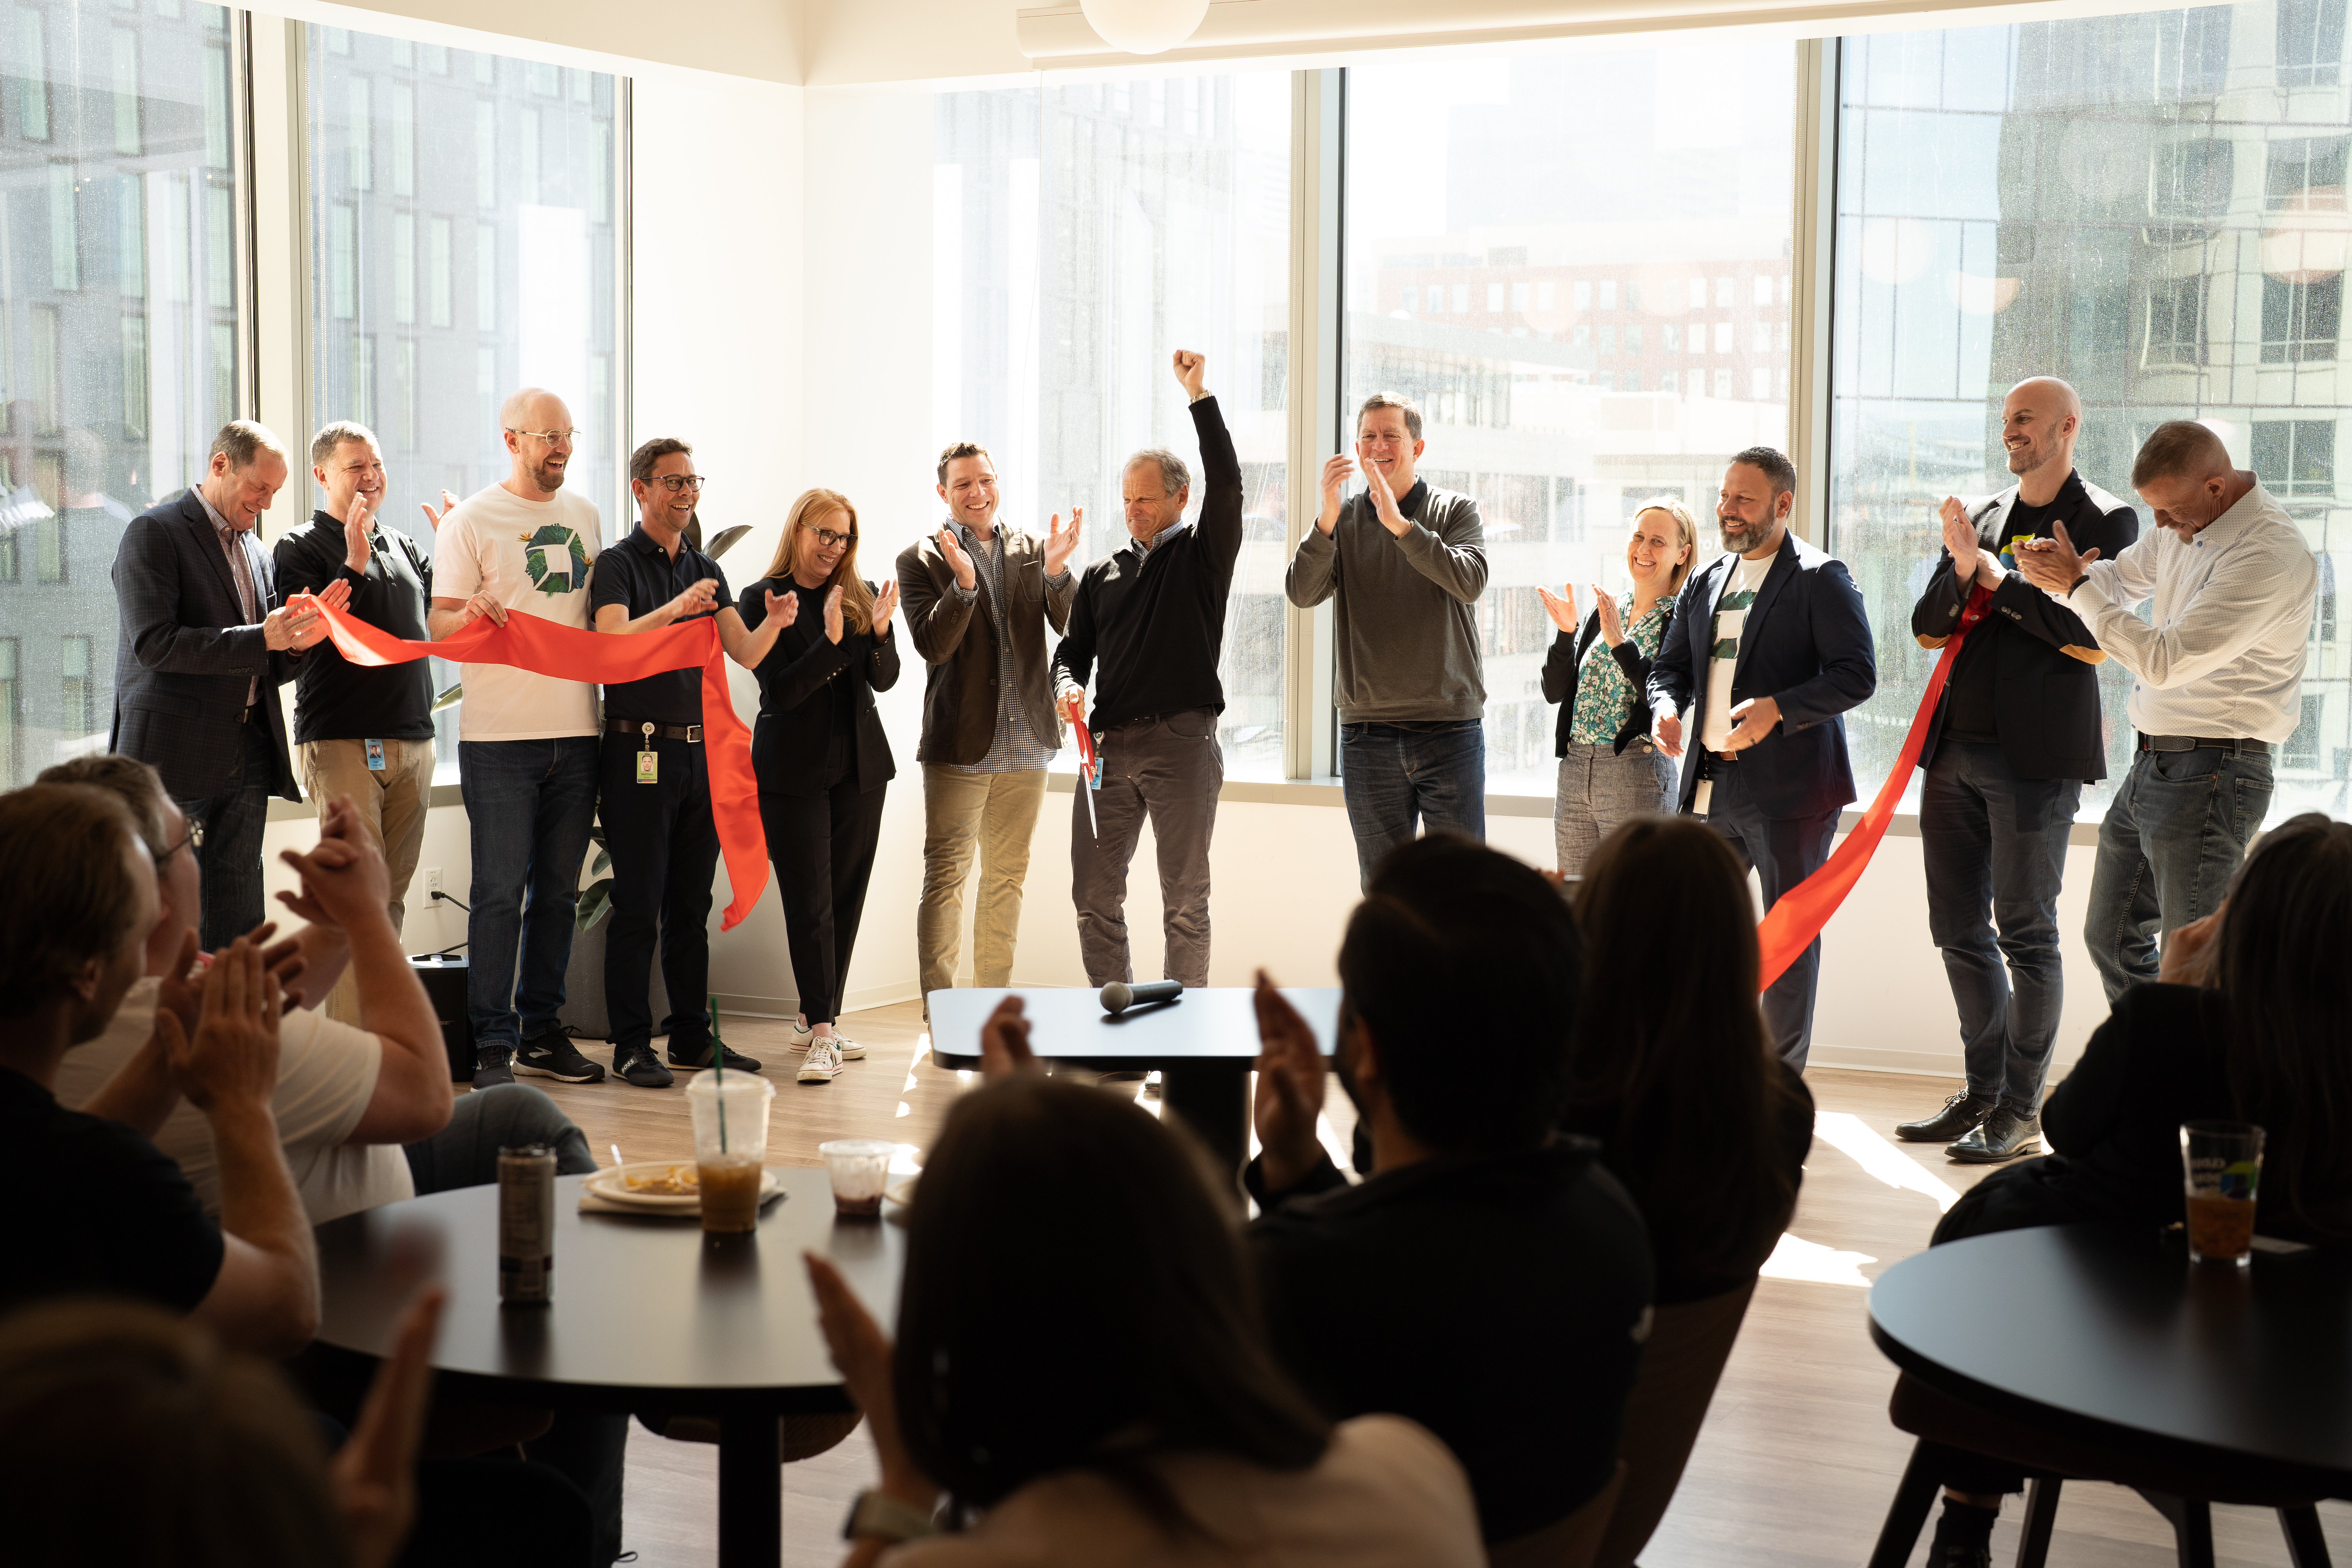 Dynatrace leaders in an office, cutting a ribbon in front of a wall of windows, audience clapping.